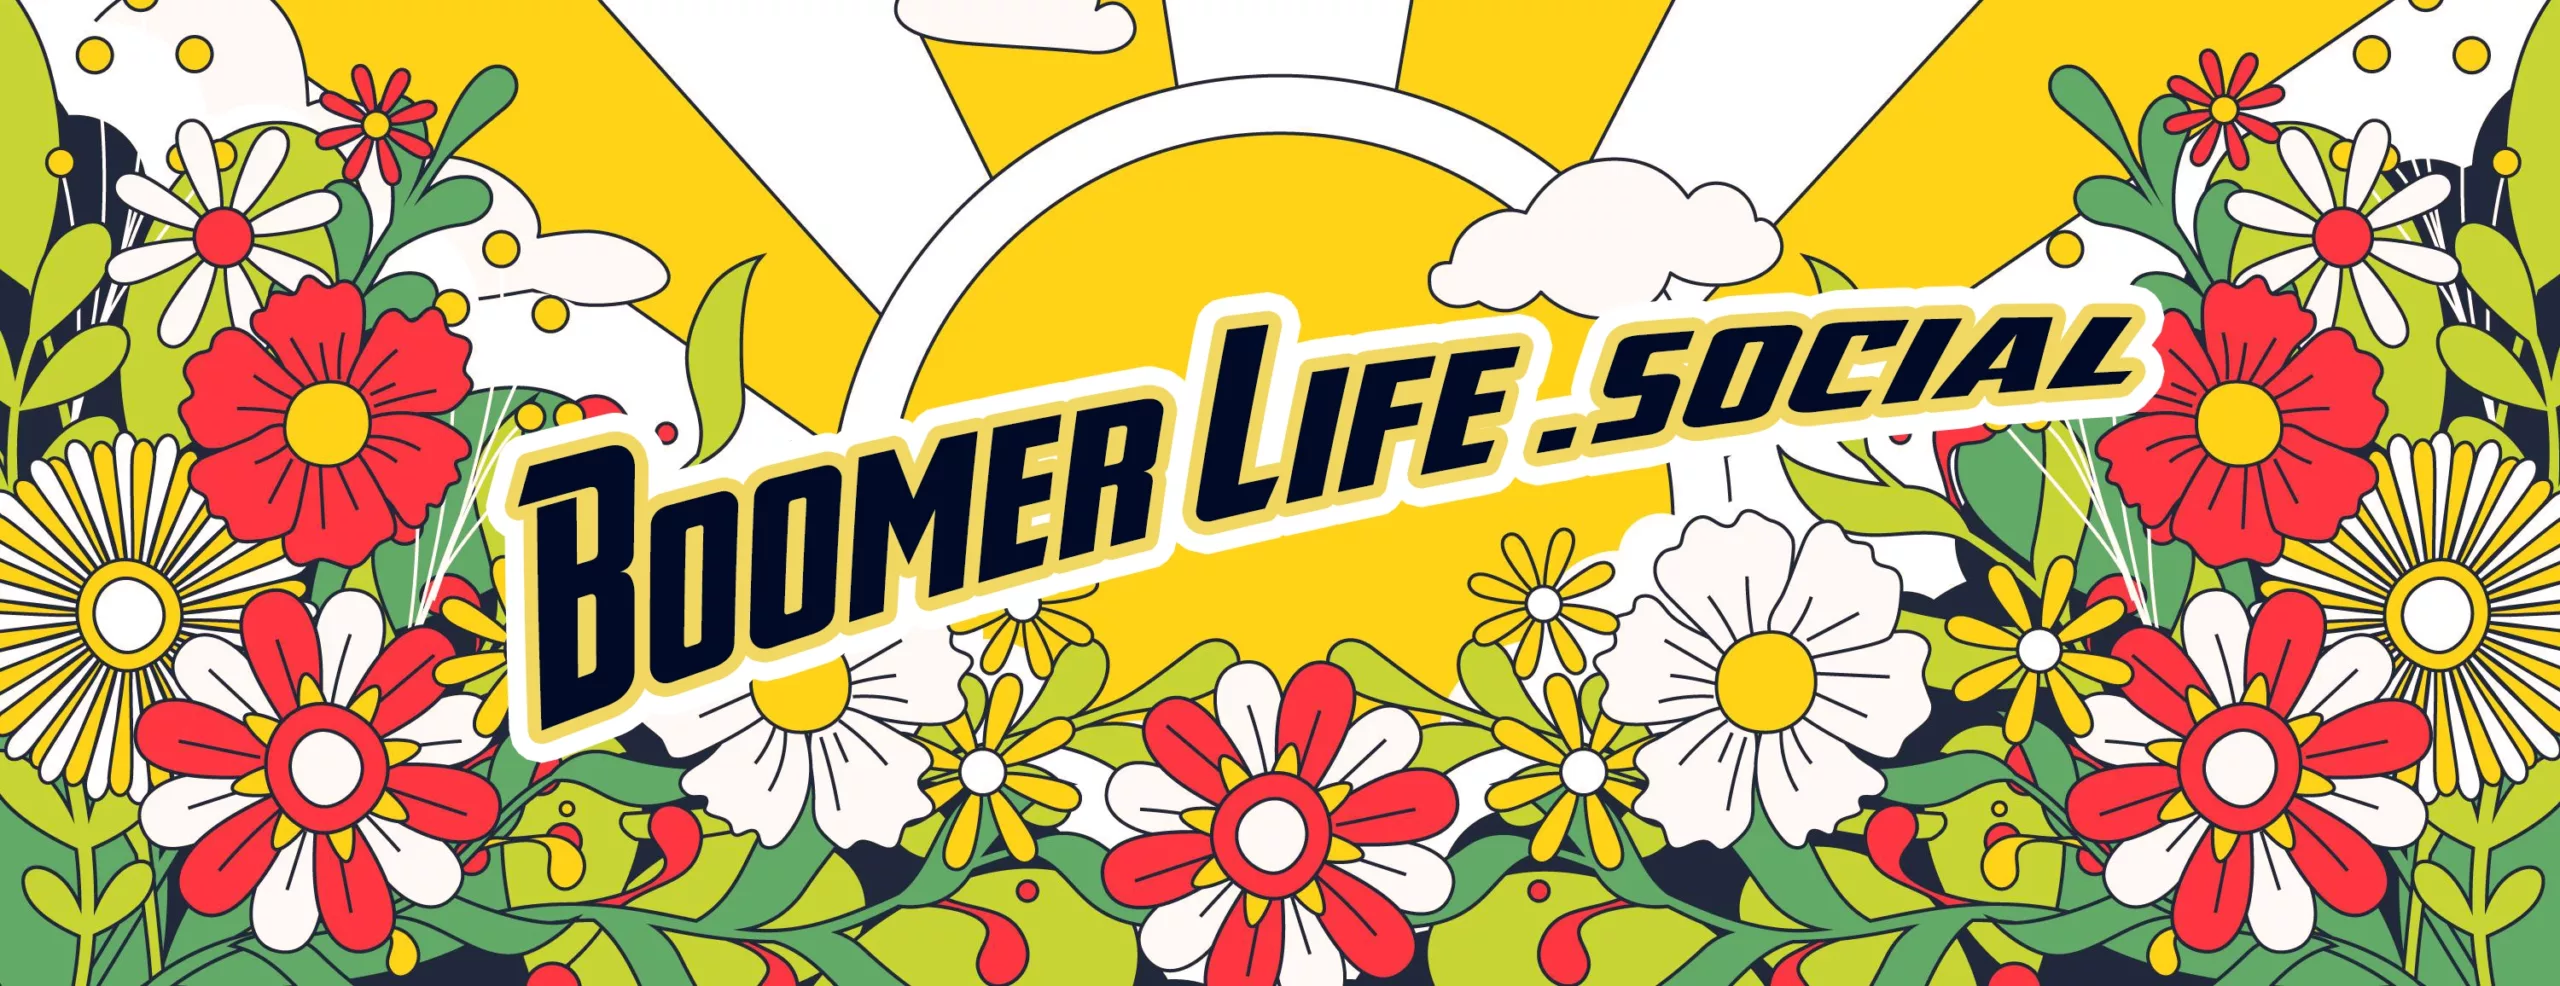 BoomerLife.social - a virtual community for boomers